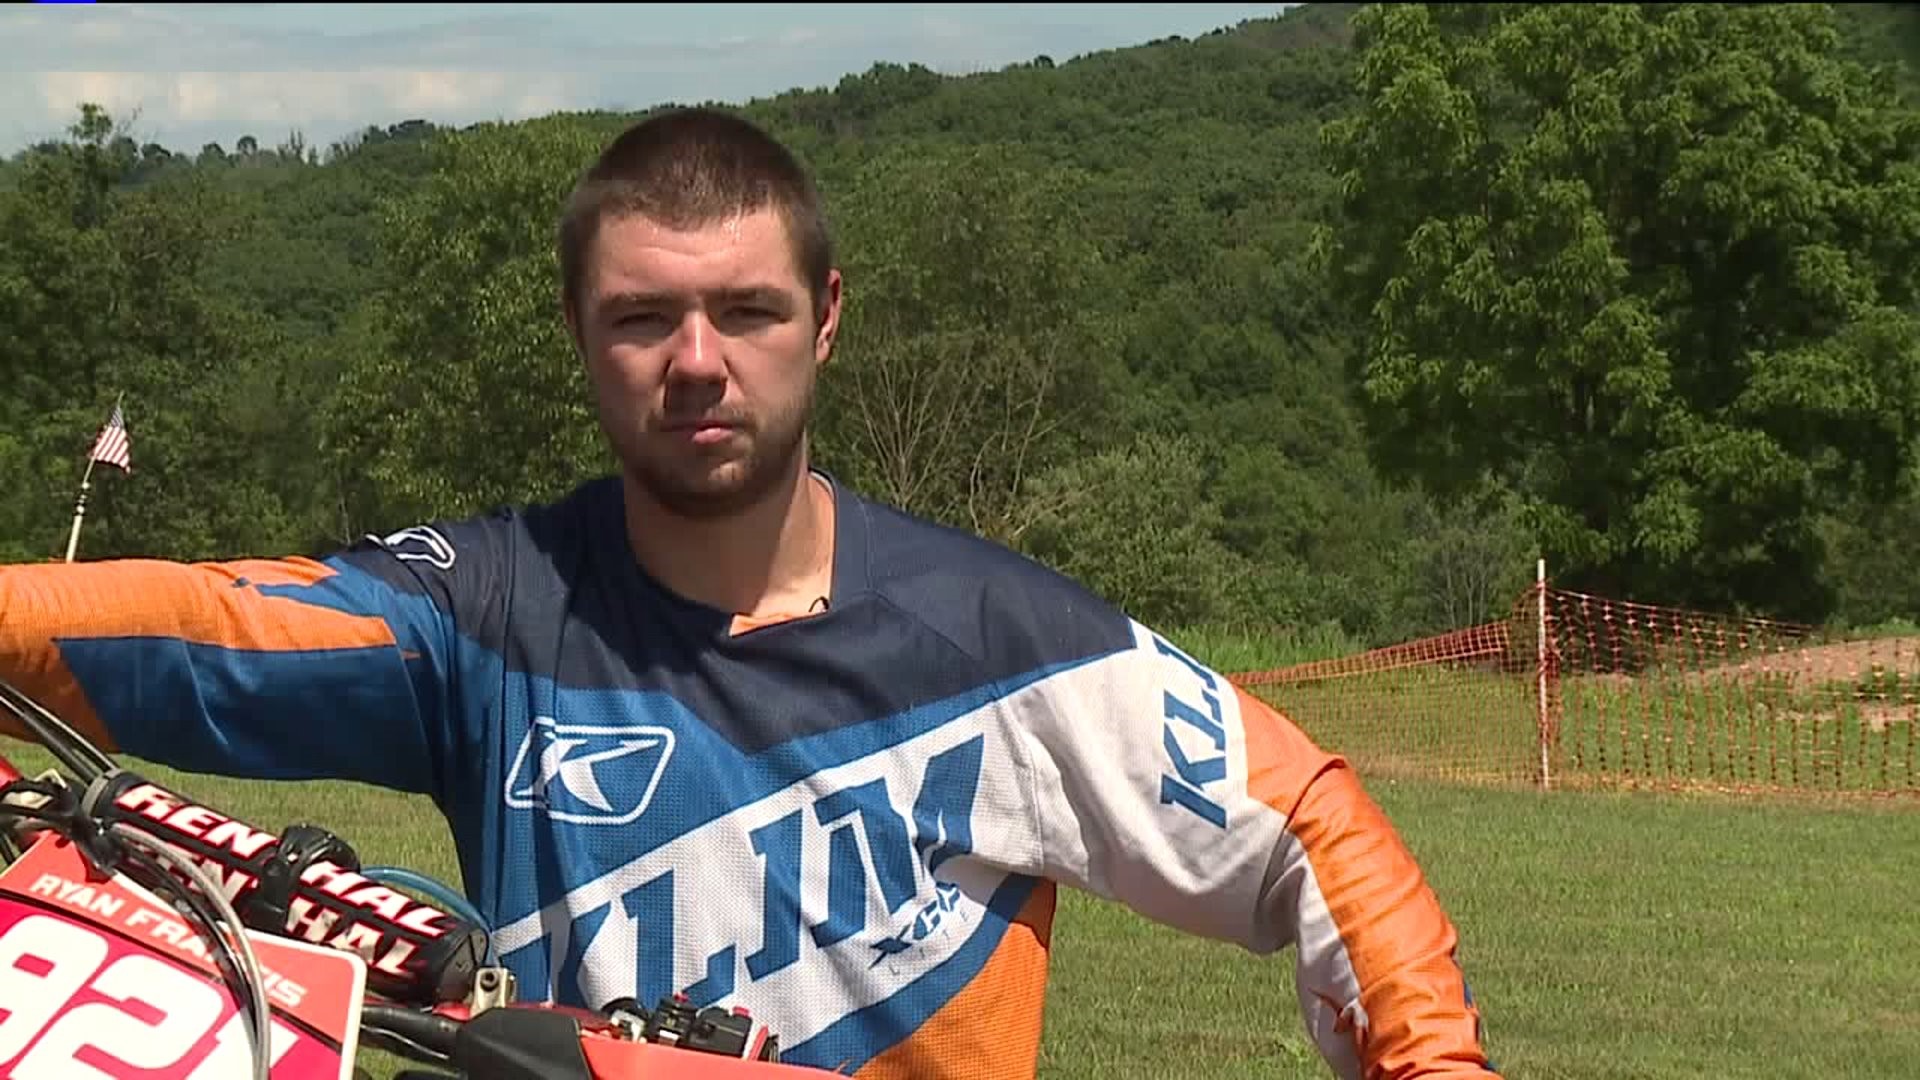 A Couple of Dirt Bike Racers: Couple Both Racing in 24 Hour Challenge